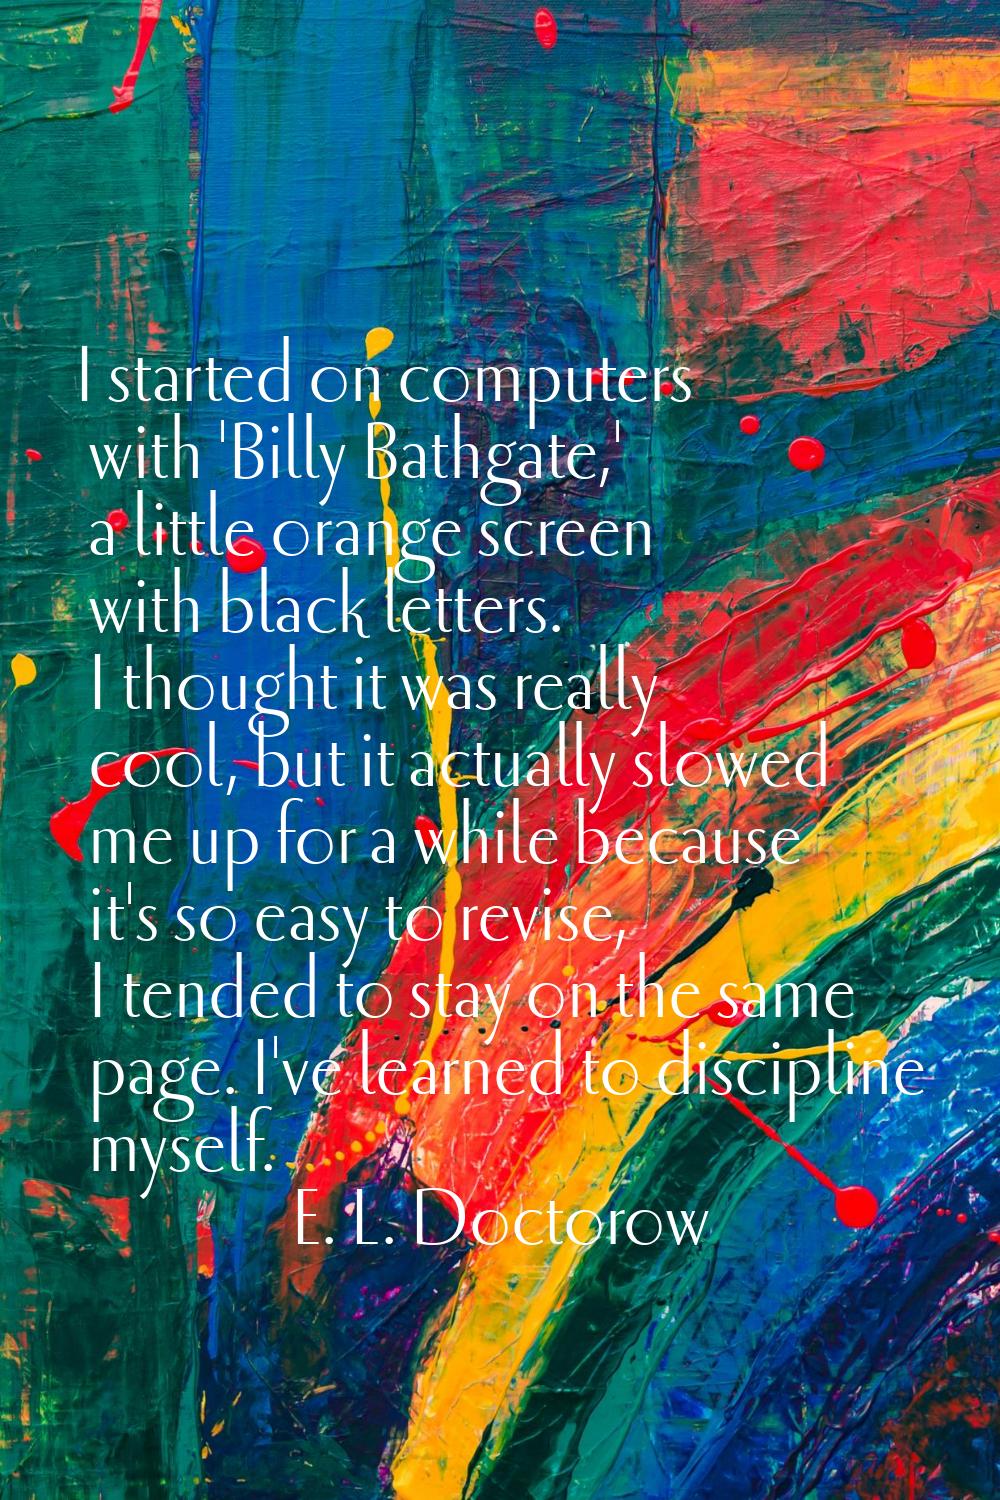 I started on computers with 'Billy Bathgate,' a little orange screen with black letters. I thought 